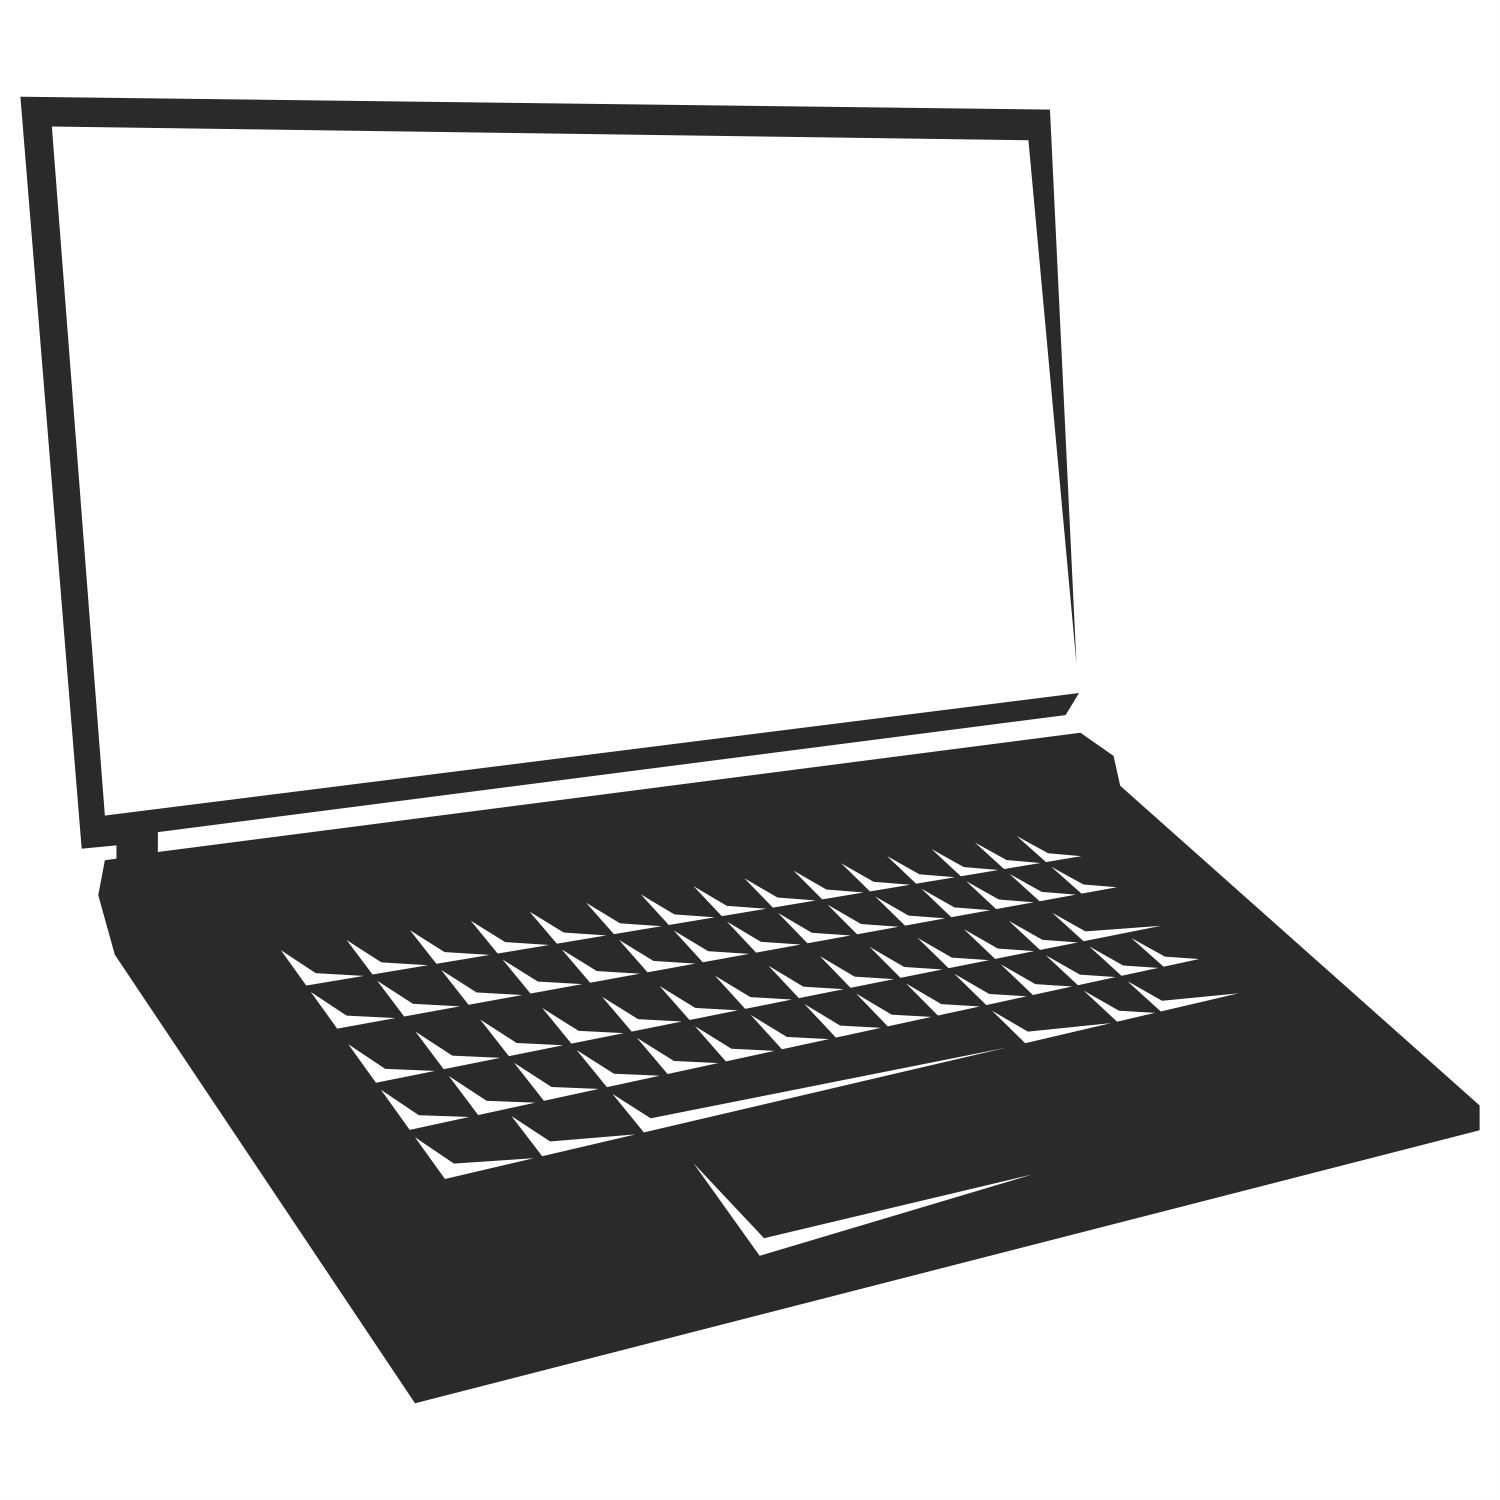 laptop clipart free download - photo #8